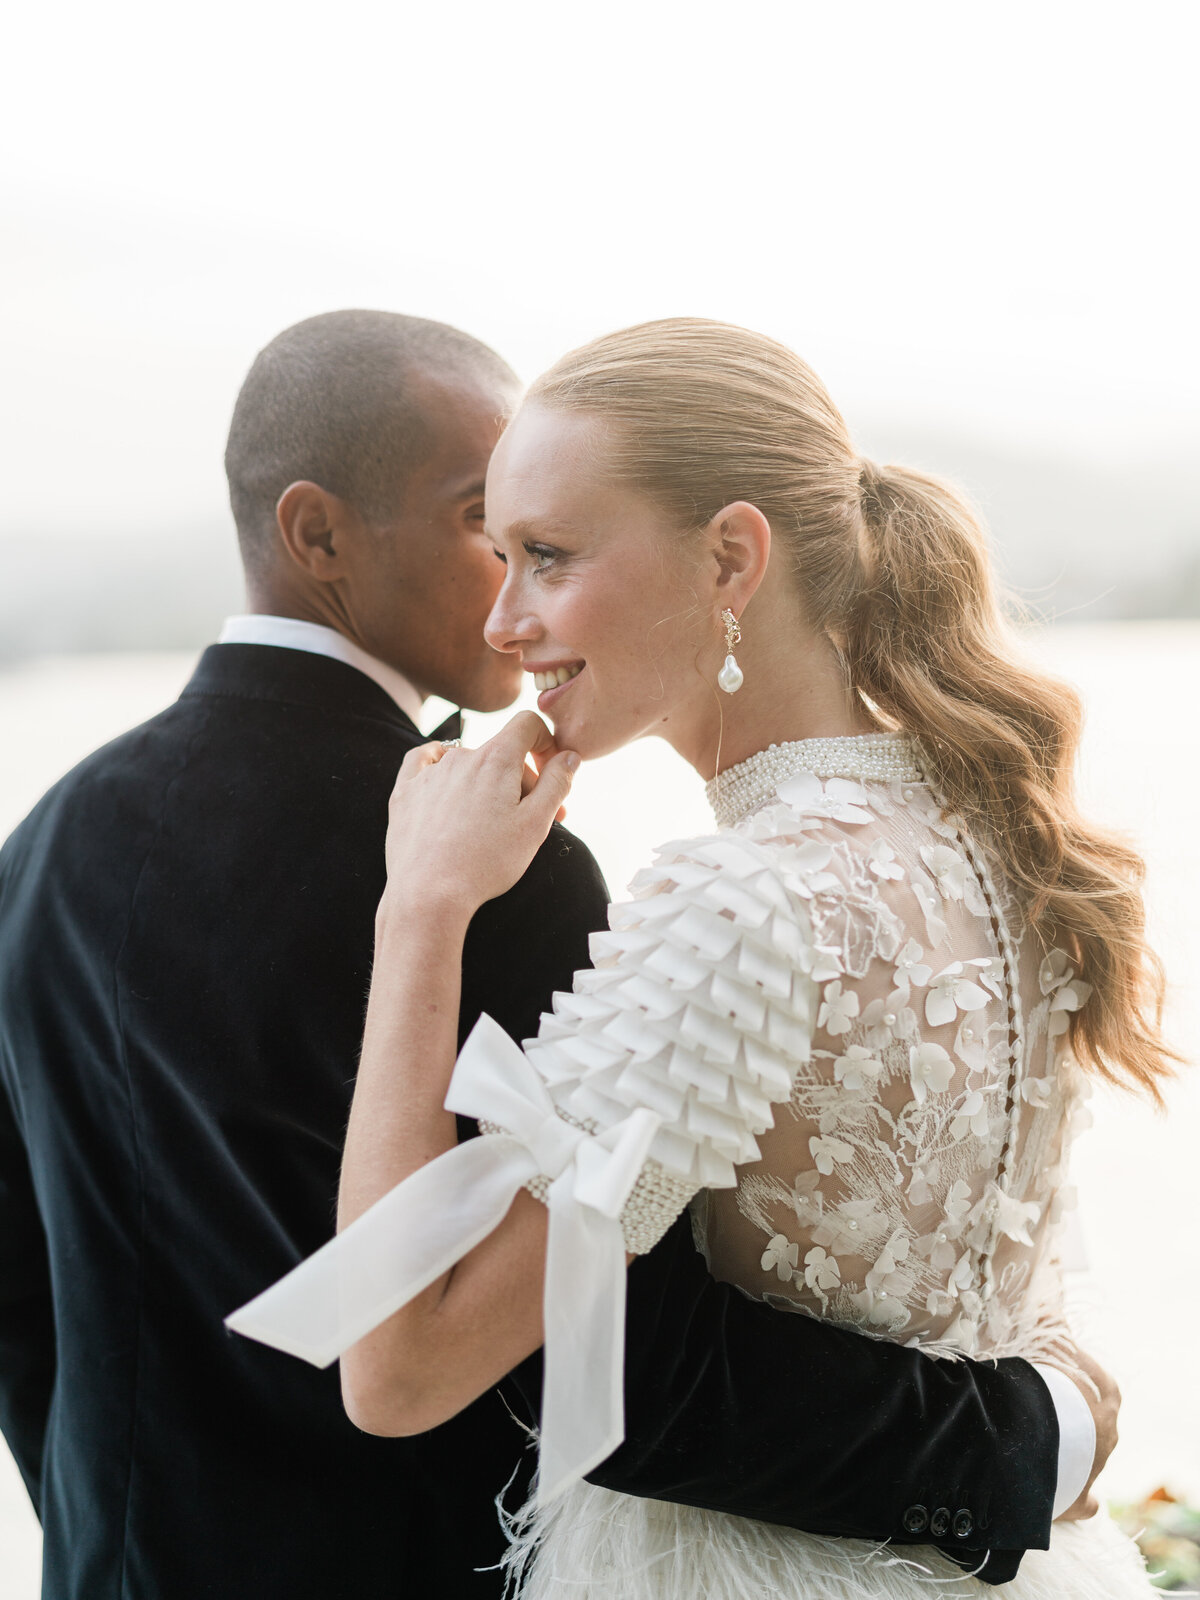 Liz Andolina Photography Destination Wedding Photographer in Italy, New York, Across the East Coast Editorial, heritage-quality images for stylish couples Villa Pizzo Editorial-Liz Andolina Photography-545